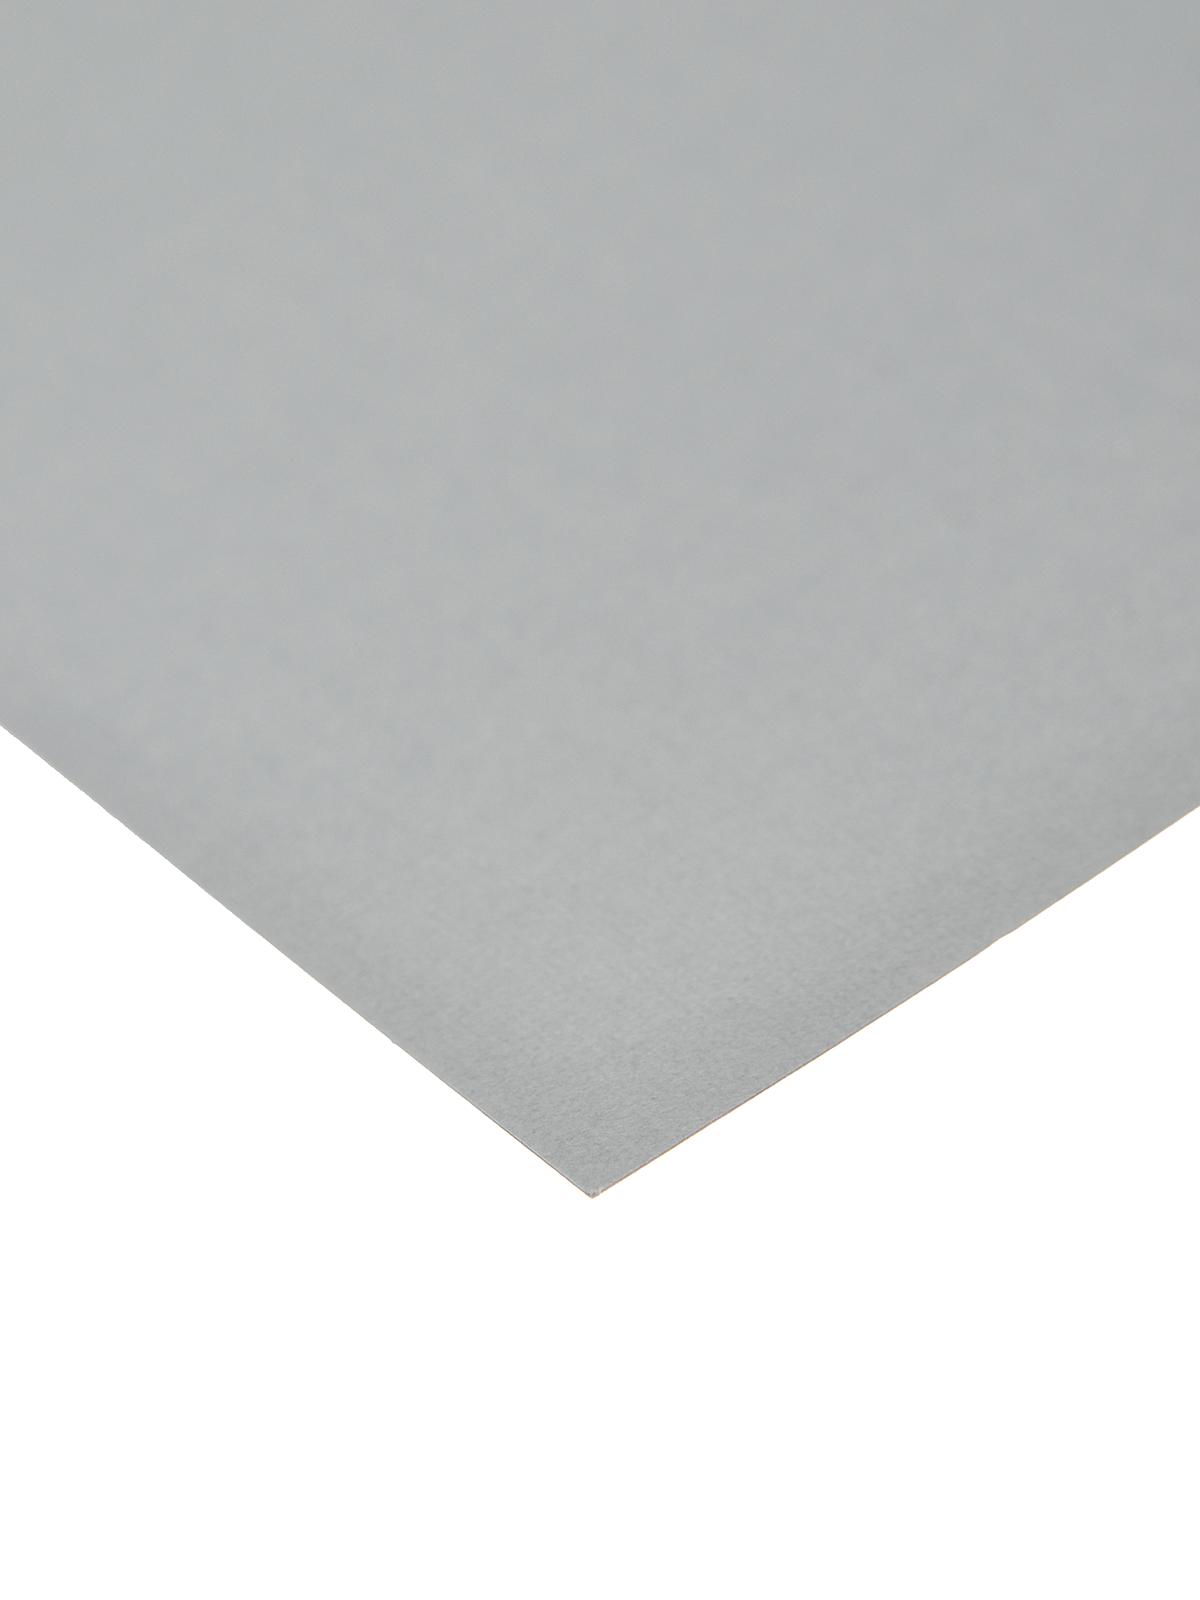 80 Lb. Canvas 8.5 In. X 11 In. Sheet Dovetail